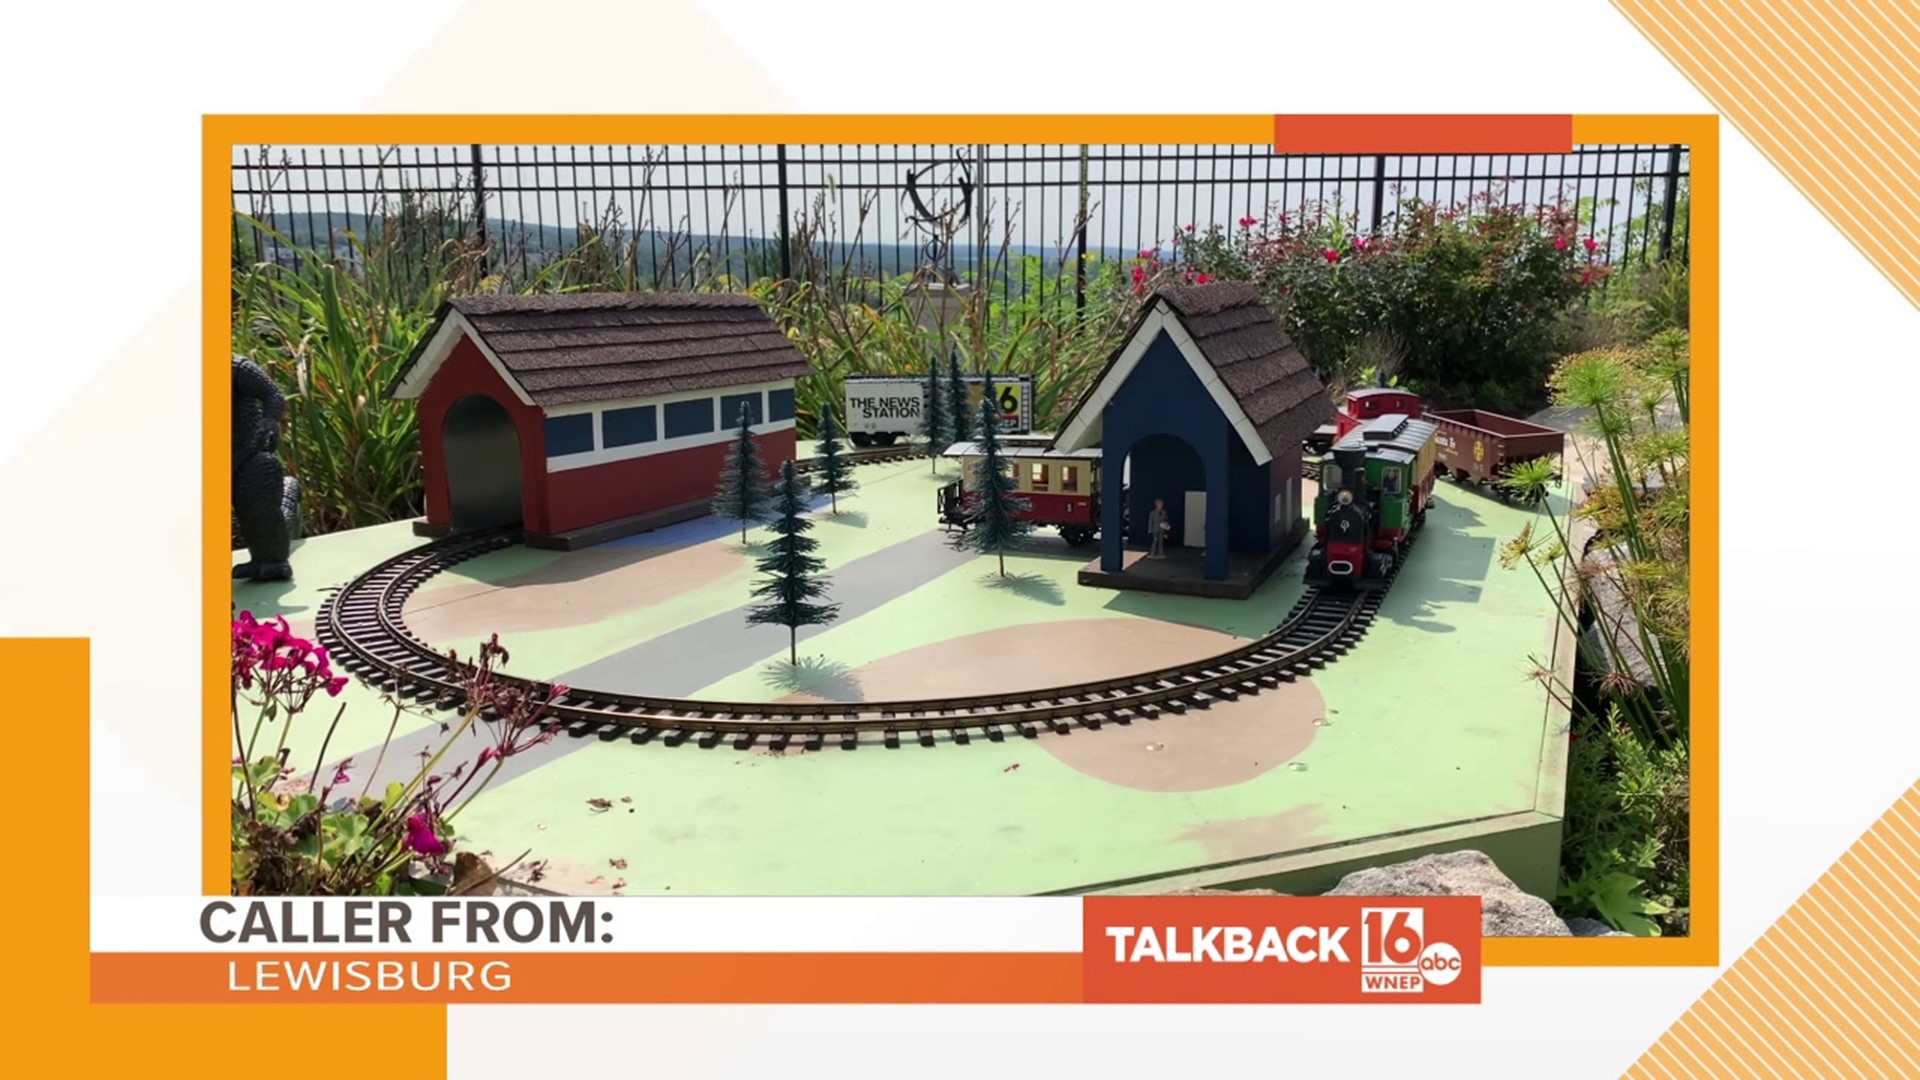 Callers are commenting on a railroad strike as well as the backyard train.